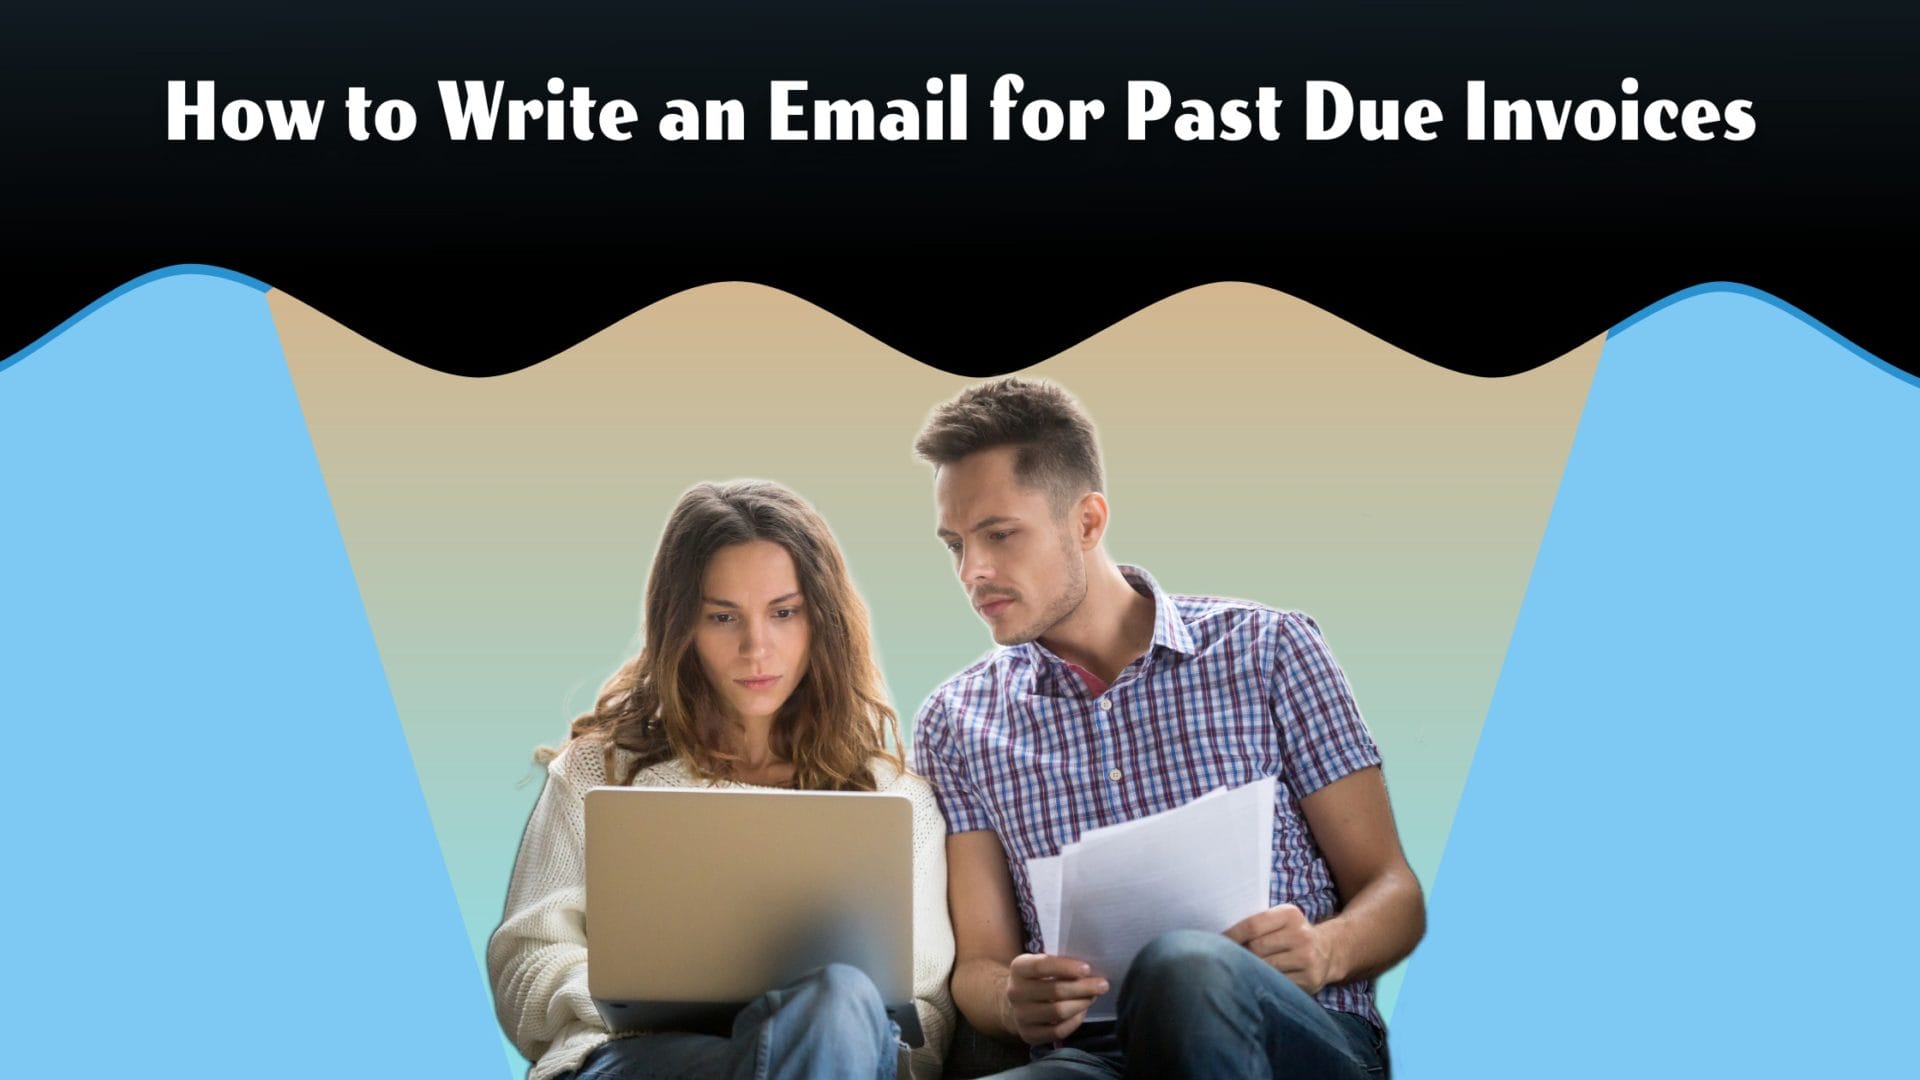 How to Write an Email for Past Due Invoices